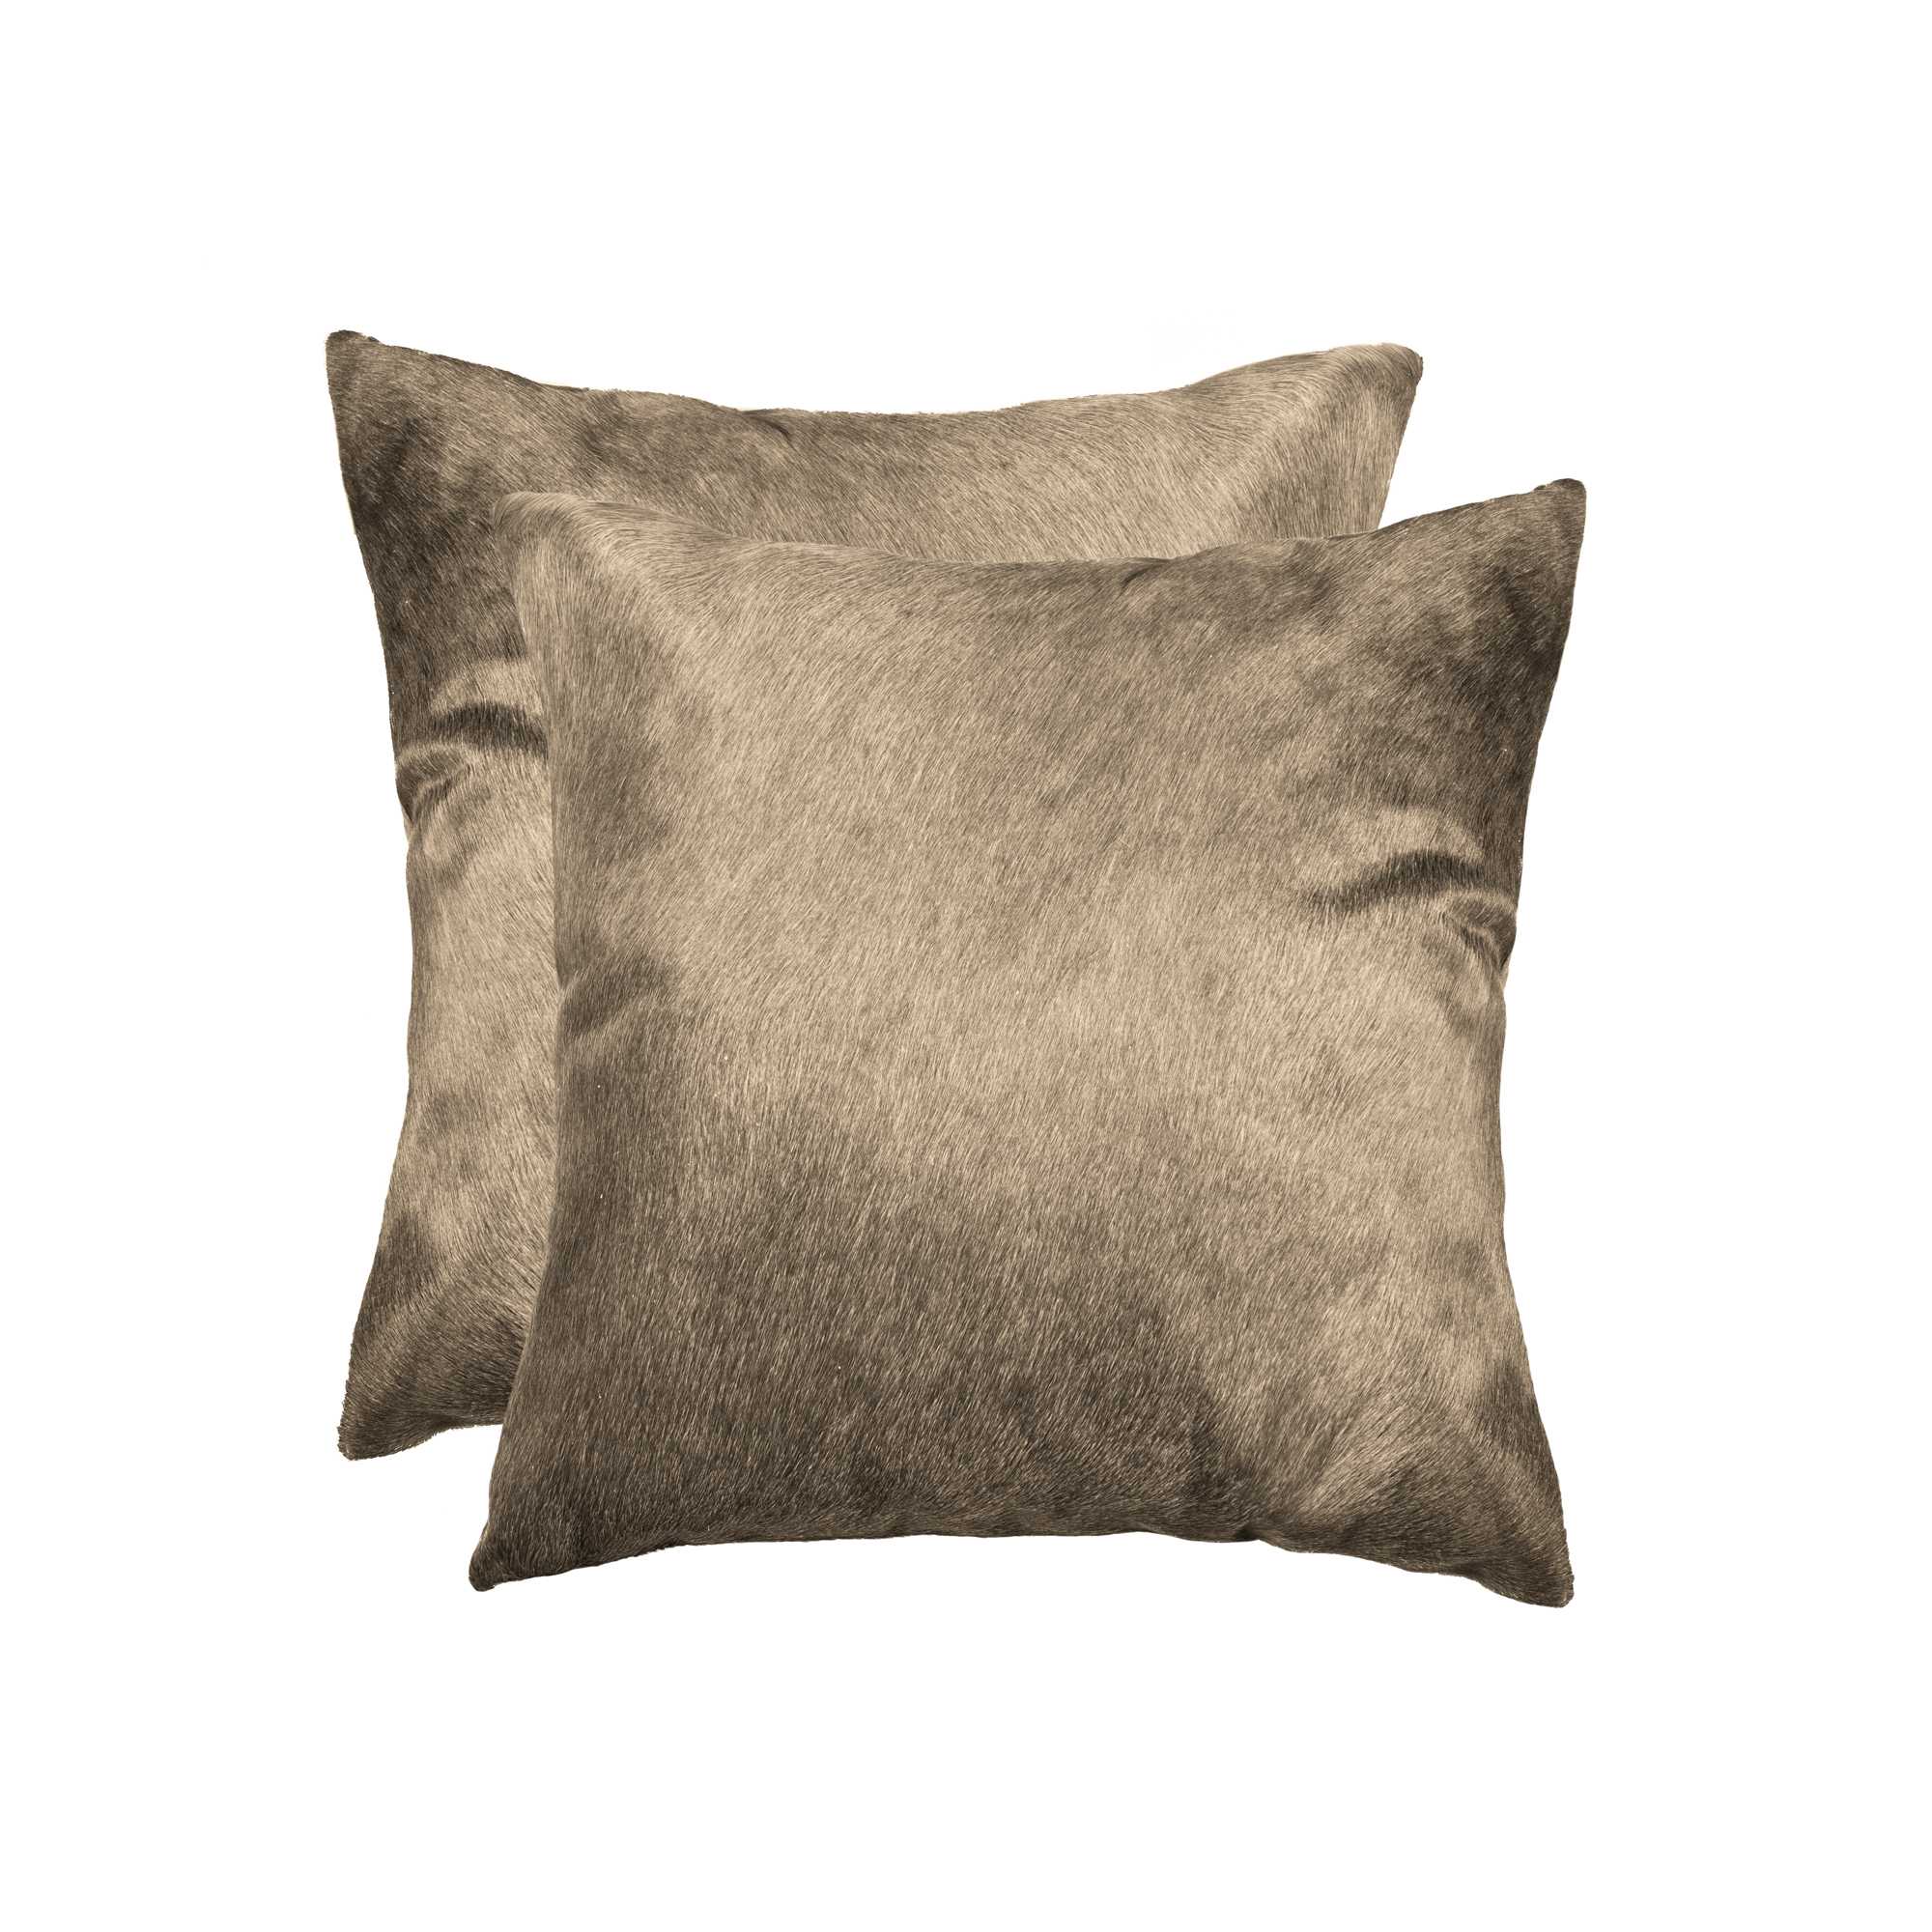 18" x 18" x 5" Taupe Cowhide - Pillow 2-Pack